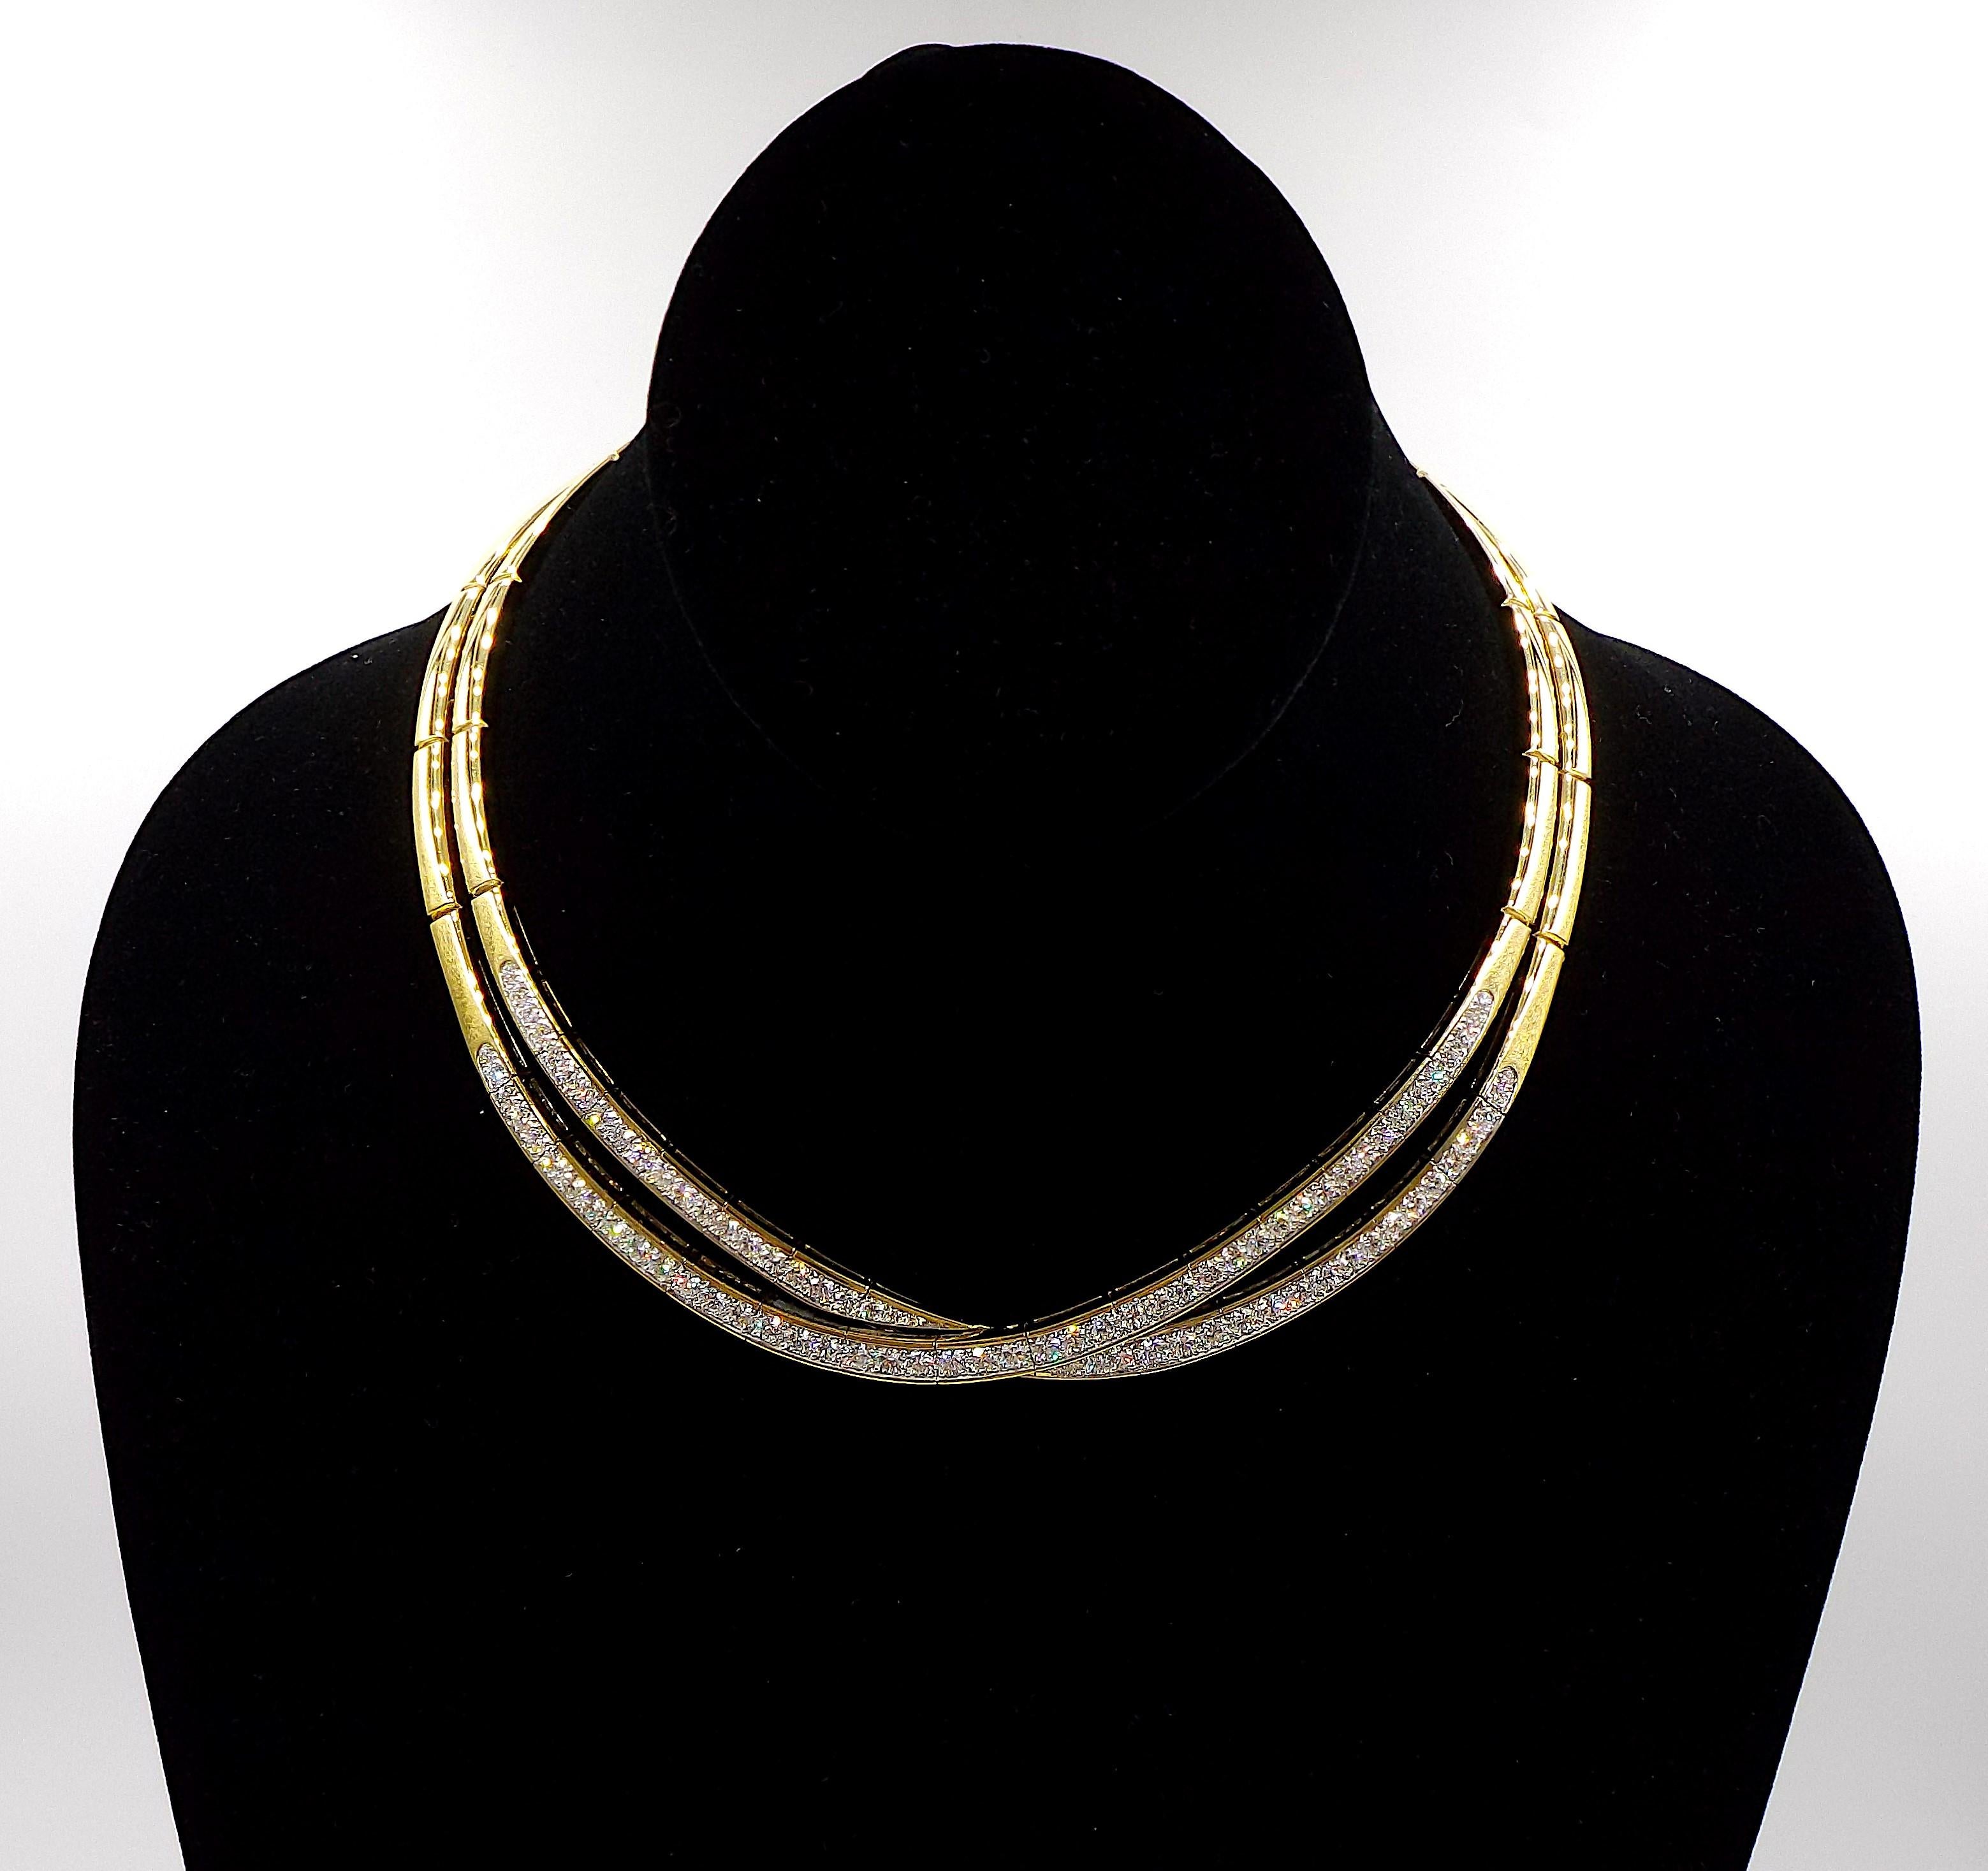 An elegant gold and diamond necklace by VCA. Featuring ap. 9ct of diamonds, F color and VVS clarity. Gross weight is 82.8 grams, inner circumference is ap. 15 inches. Signed, numbered, stamped 750. Comes with a large vintage VCA box.